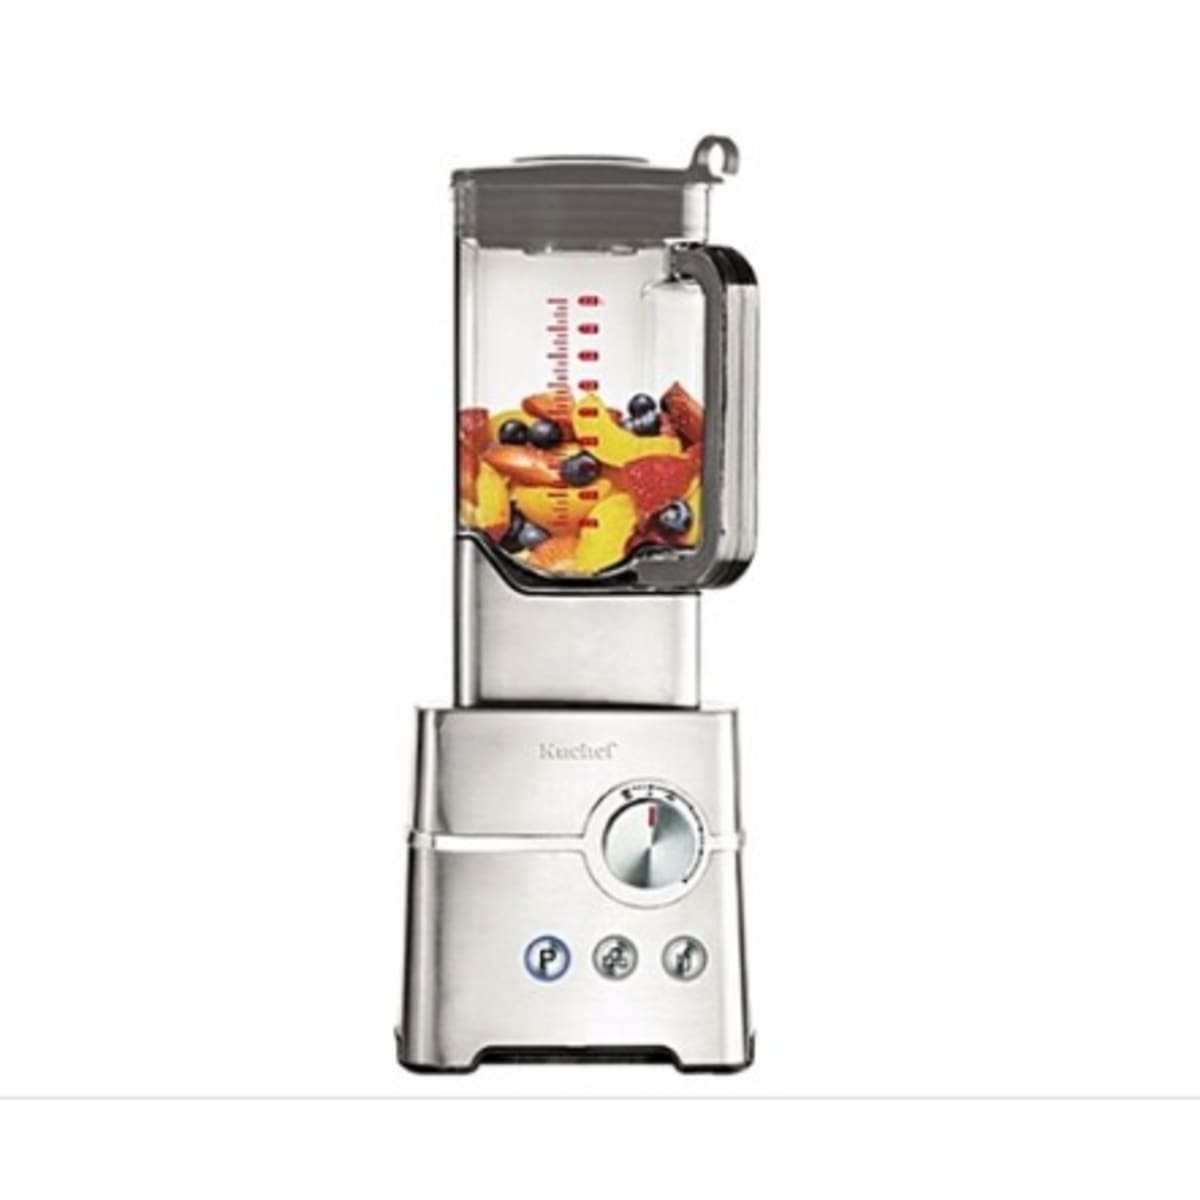 Kuchef Powerful High Performance Blender - 2000w + Ice Crusher - With Variable Control | Konga Online Shopping